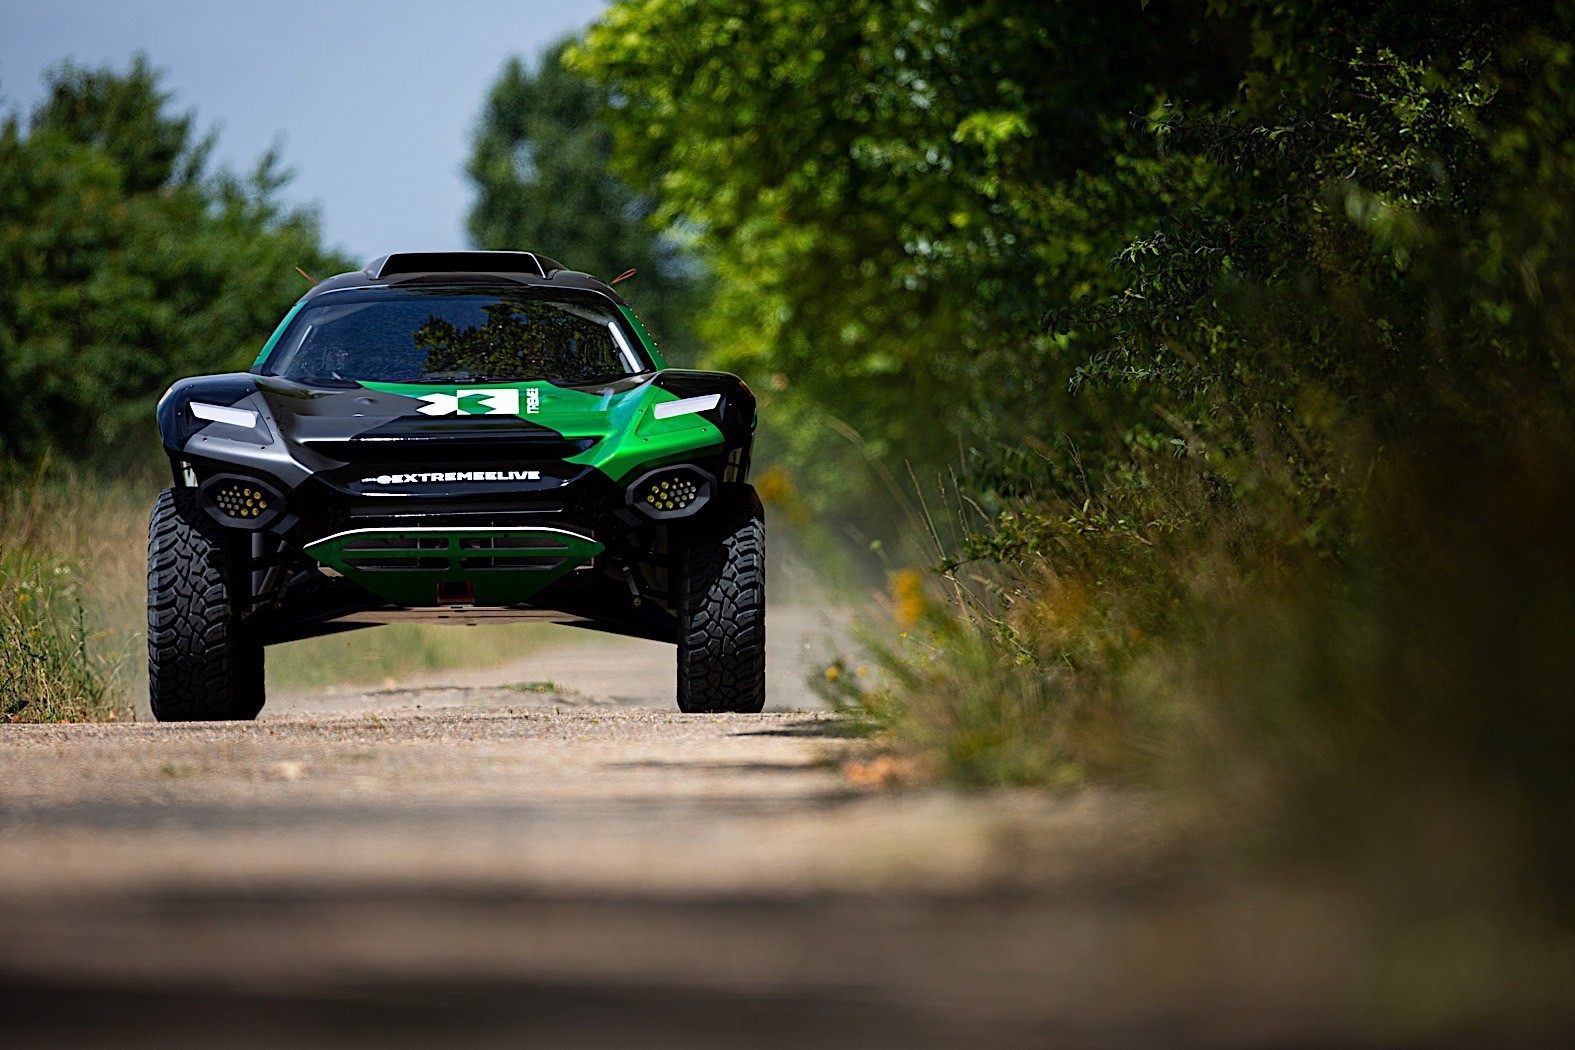 Extreme E Electric SUV Off Road Racing Series Comes in 